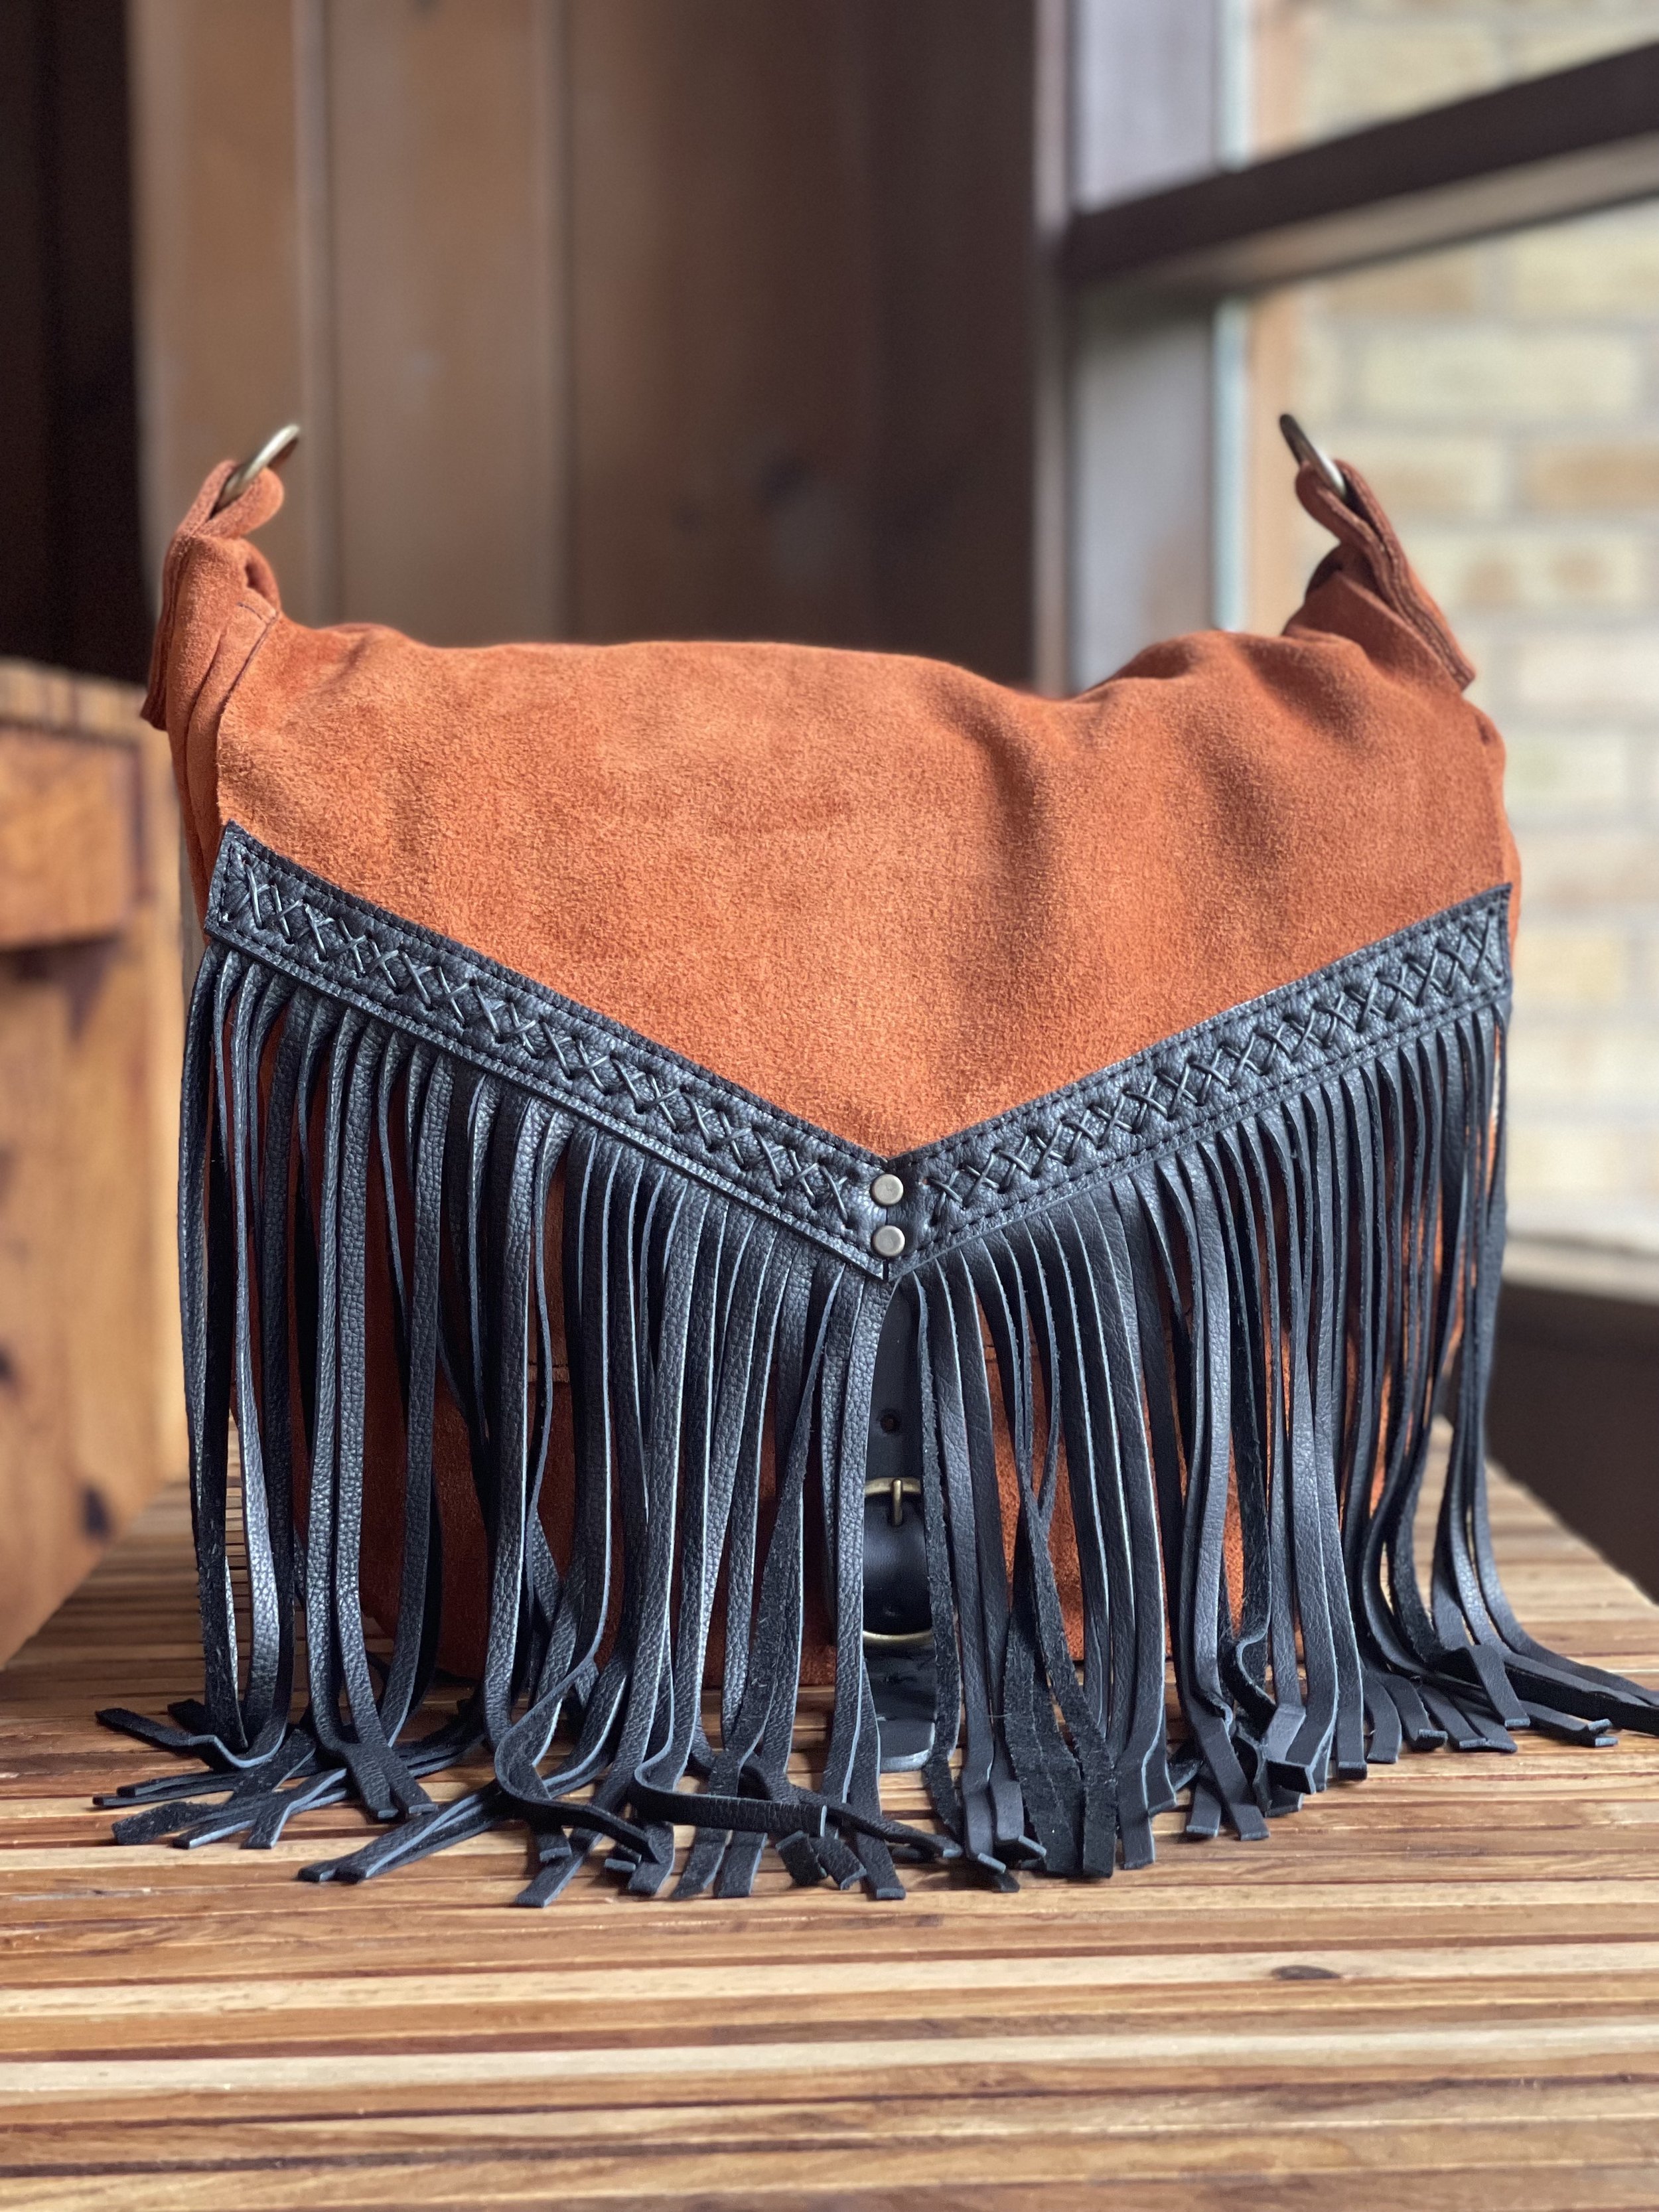  Body: Rust Suede Fringe: Black Bison Leather Fringe Border: Black Bison Leather Custom Gusset Placement D Ring Tabs: Rust Suede Antique Brass Hardware Black Criss Cross Hand-Stitching 